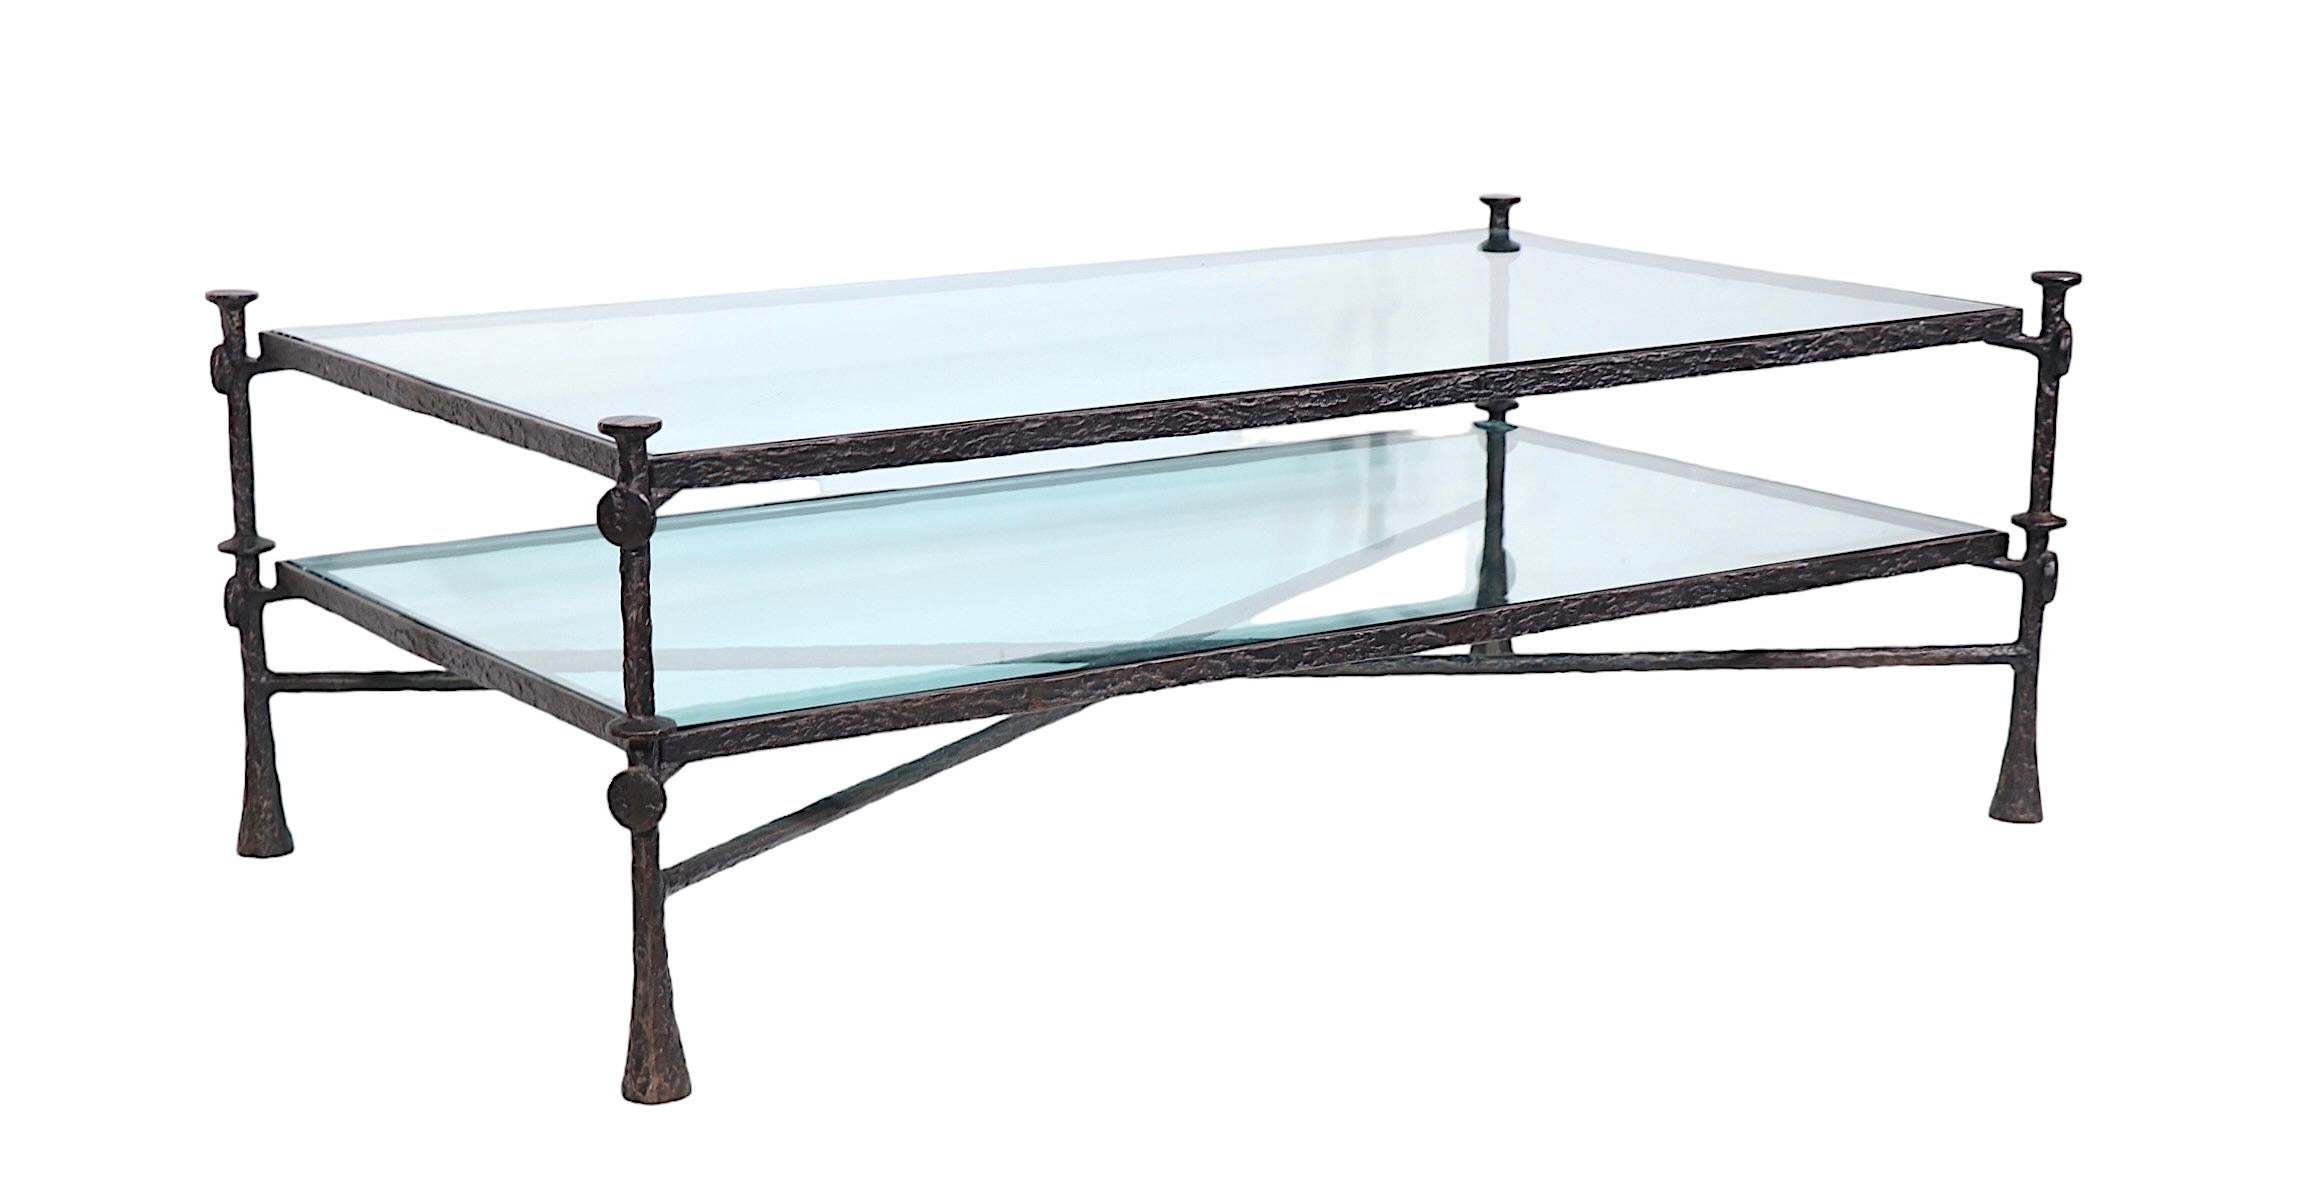 Incredible Brutalist style coffee table executed in faux hammered  bronze ( iron ) , and thick ( .75 in. ) bevelled  tempered glass. The table features two surfaces, lower surface H 10.5 in. x upper surface H 18.5 in. which are supported by the iron